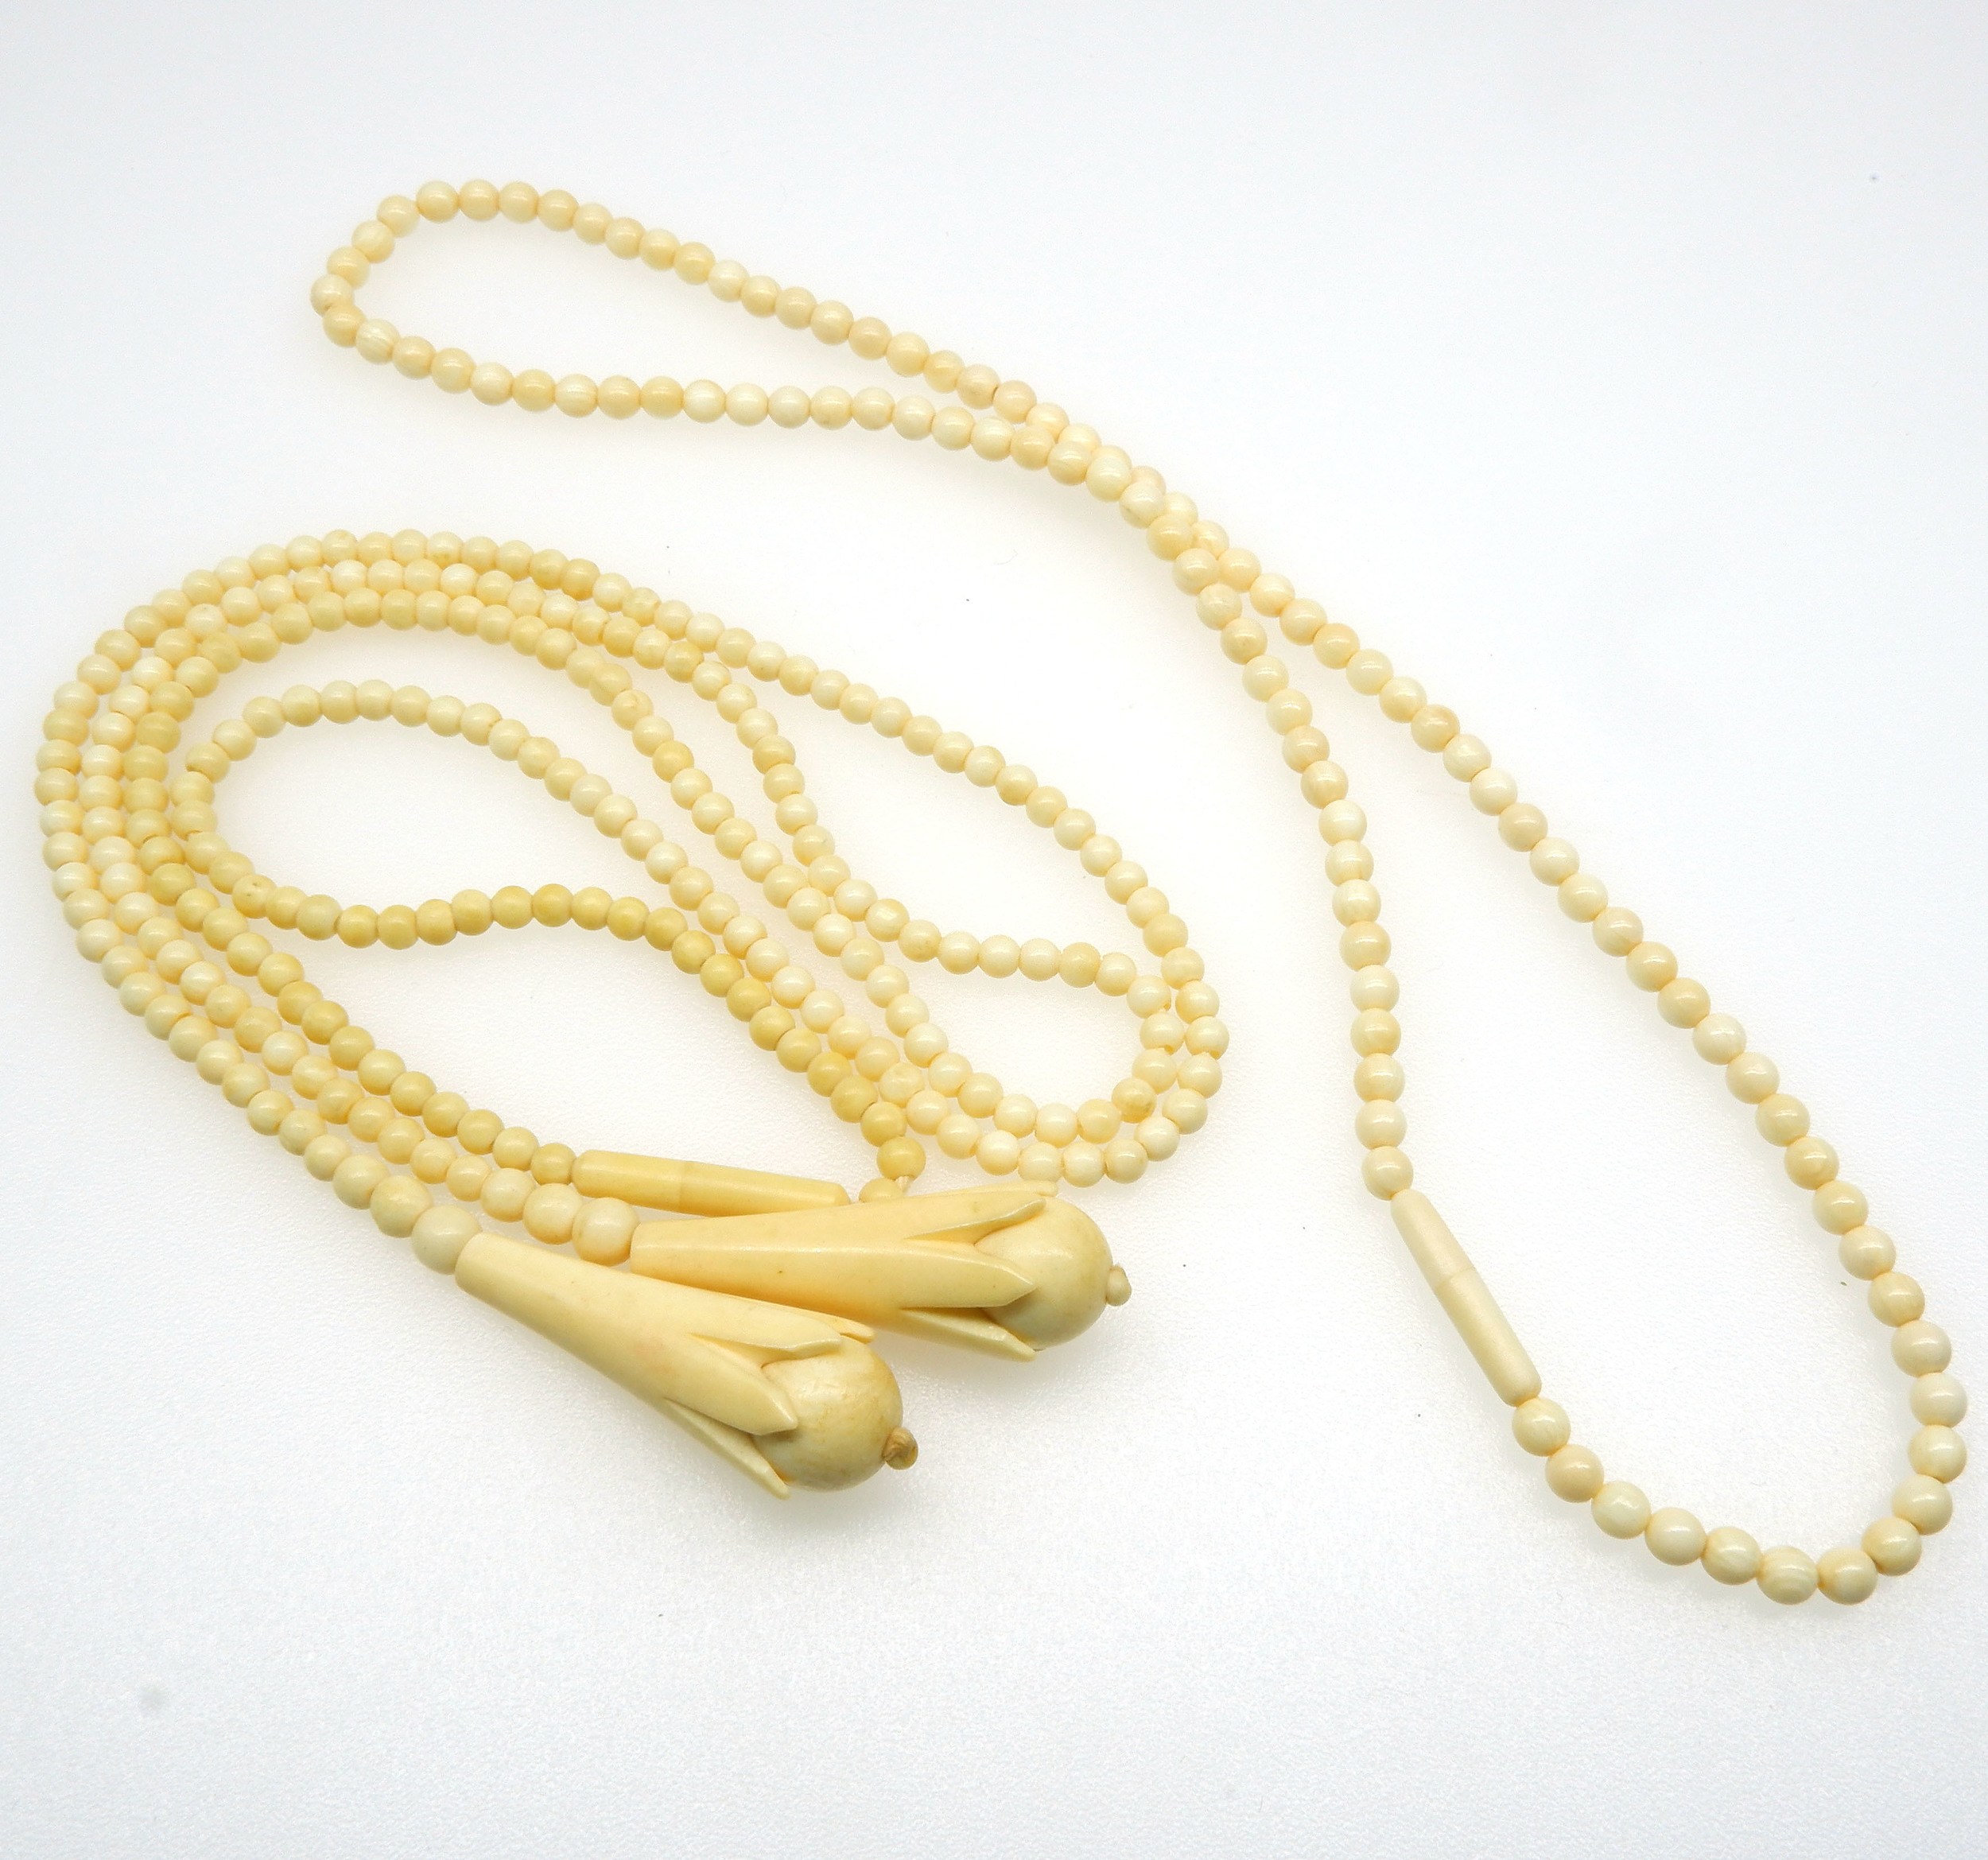 'Strand of 3.50mm Ivory Beads with Two Tear Drop Shaped Ends and a Strand of 4mm Ivory Beads'